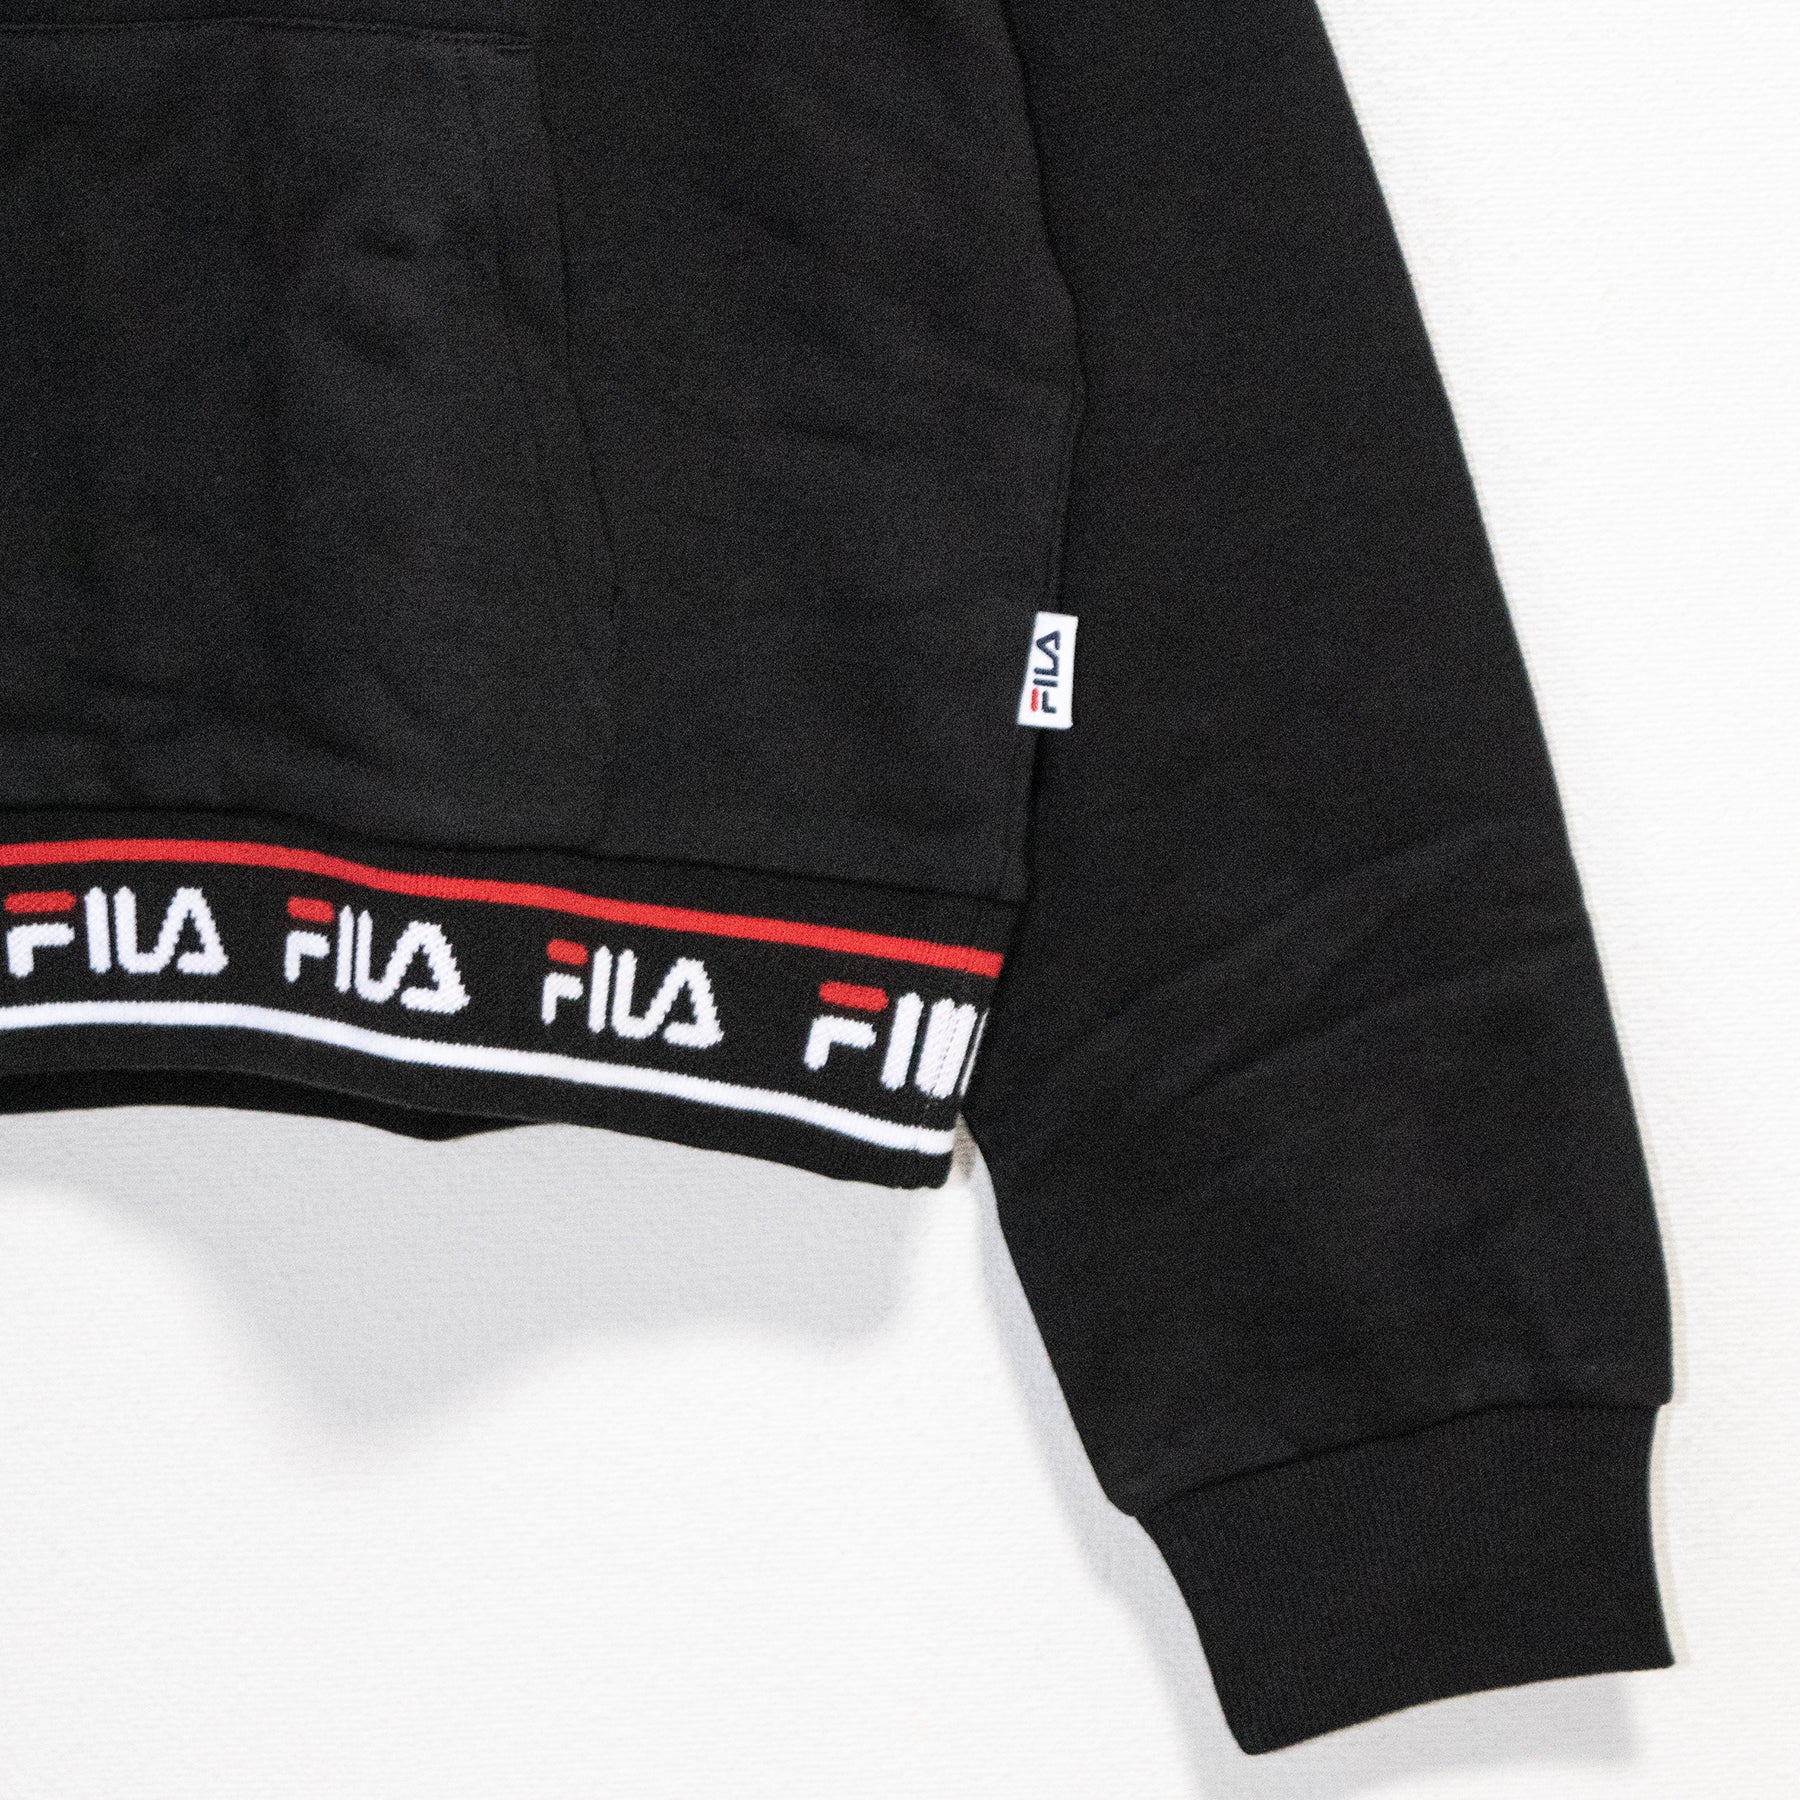 FILA Pullover Hoodie FL6096 (2 color) - YOUAREMYPOISON